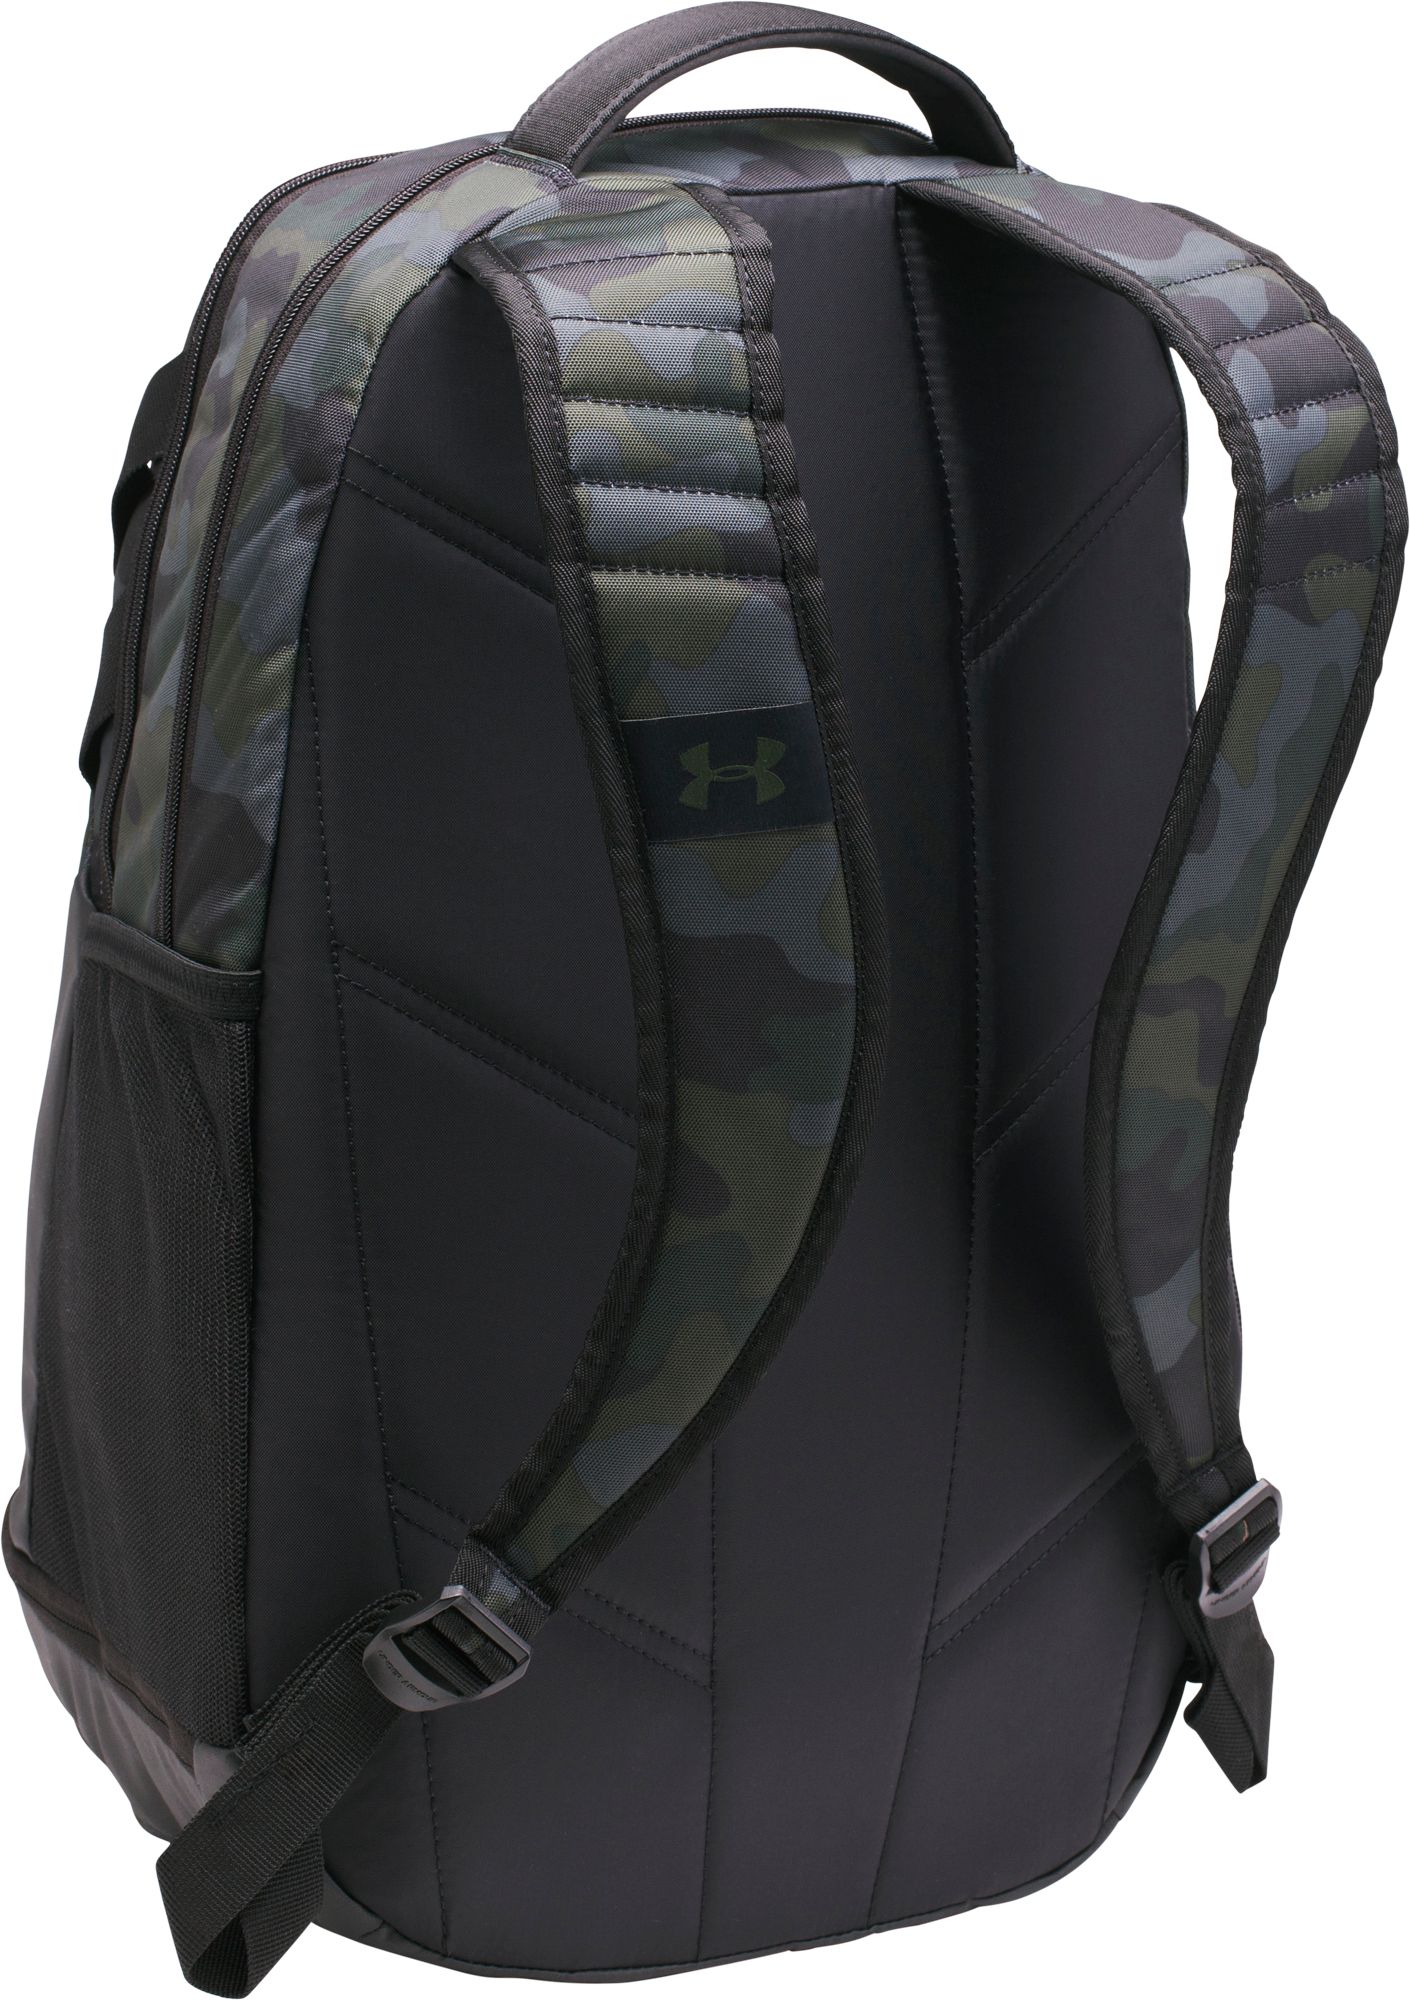 under armour hustle 3.0 backpack dimensions